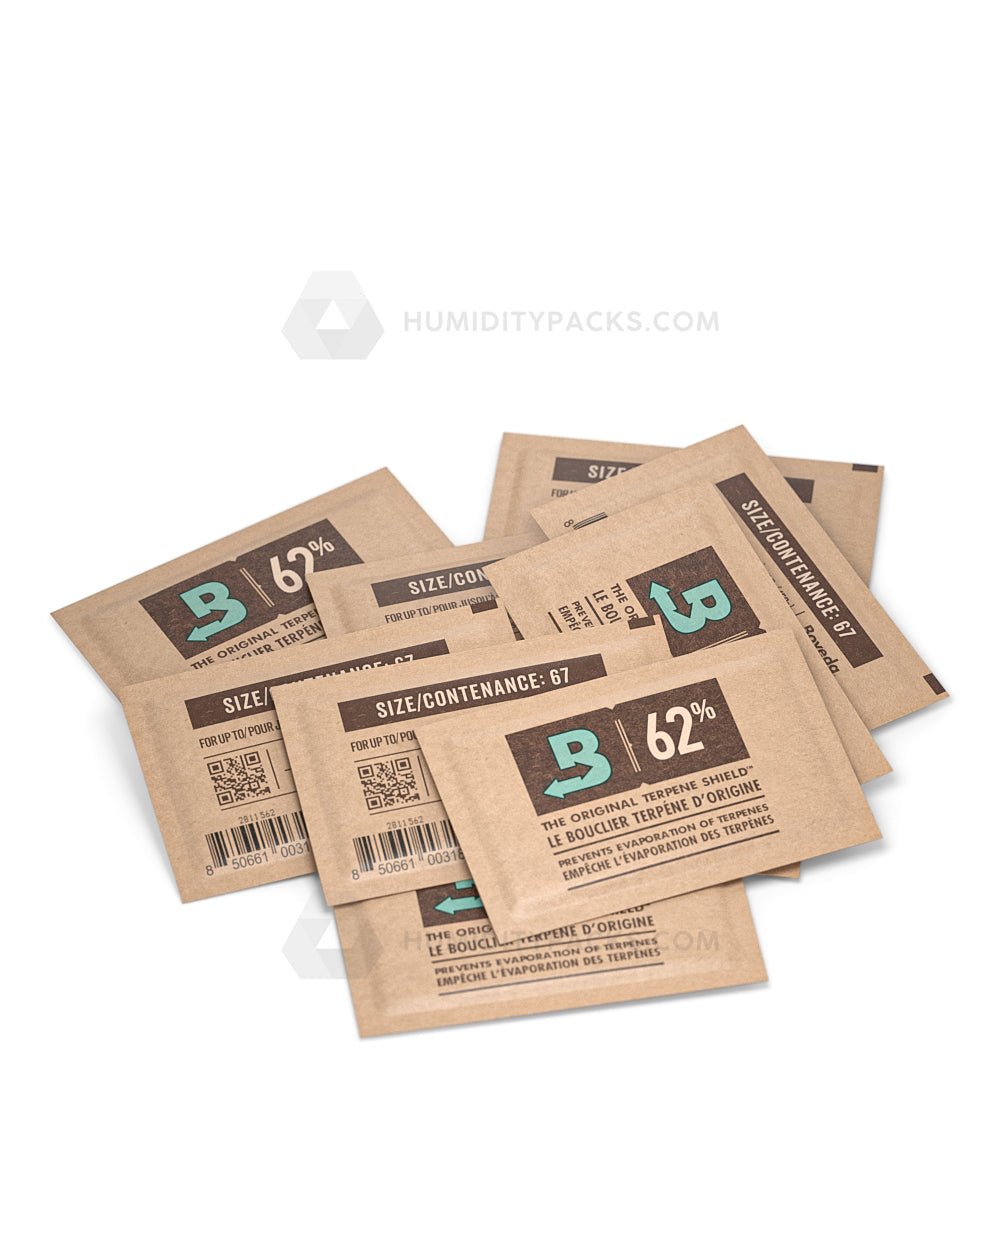 Boveda Humidity Control Packs 67 Grams - 62% - 100 Count